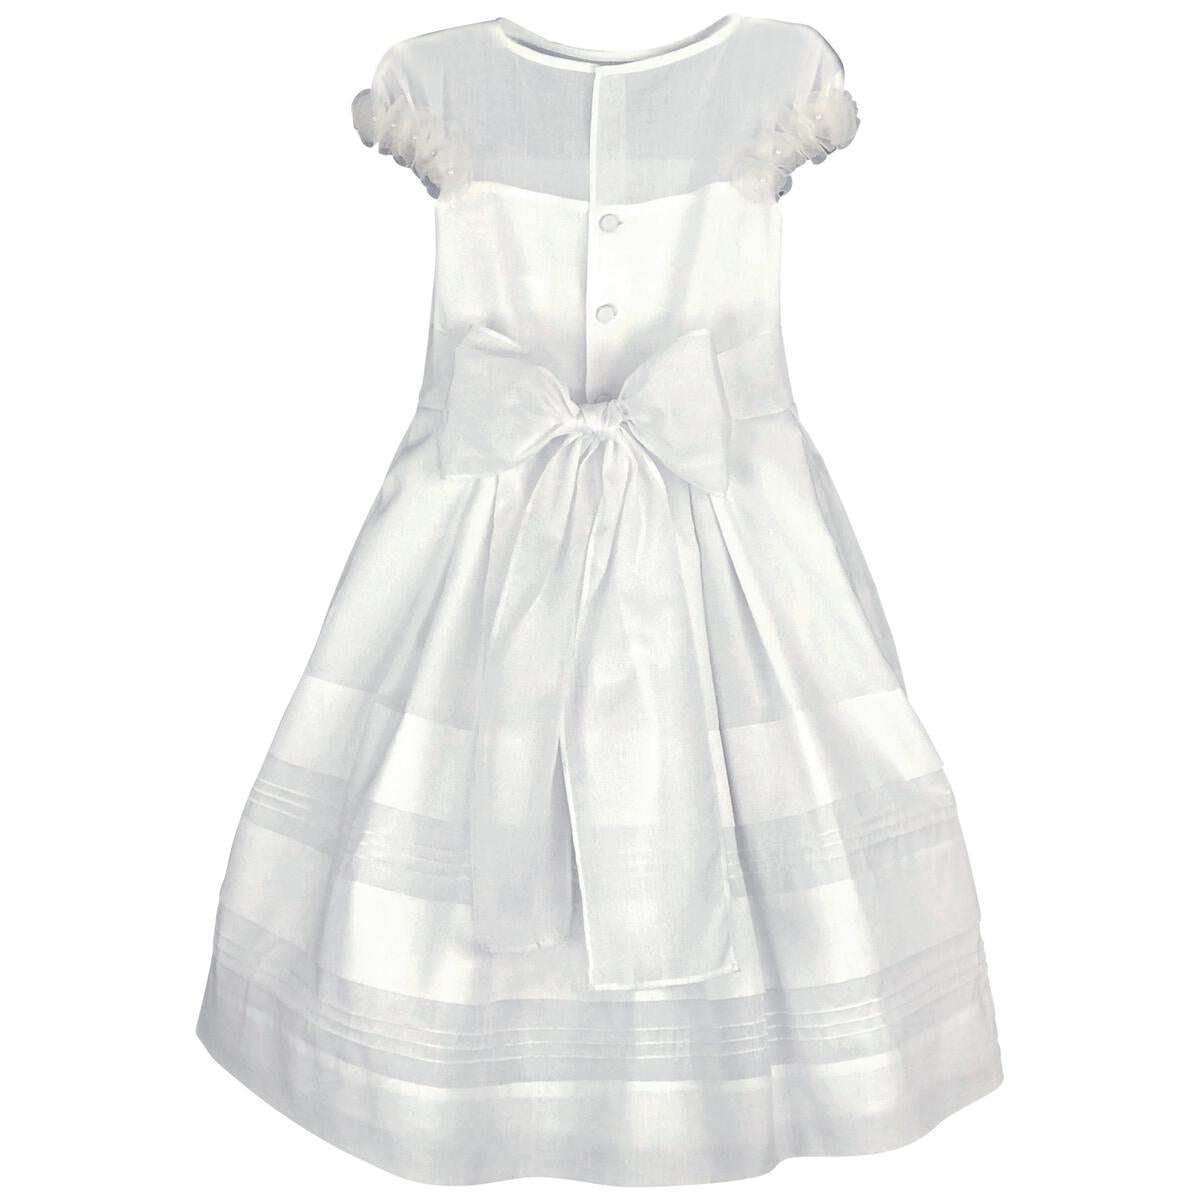 LILY ORGANDY WITH FLOWER DRESS